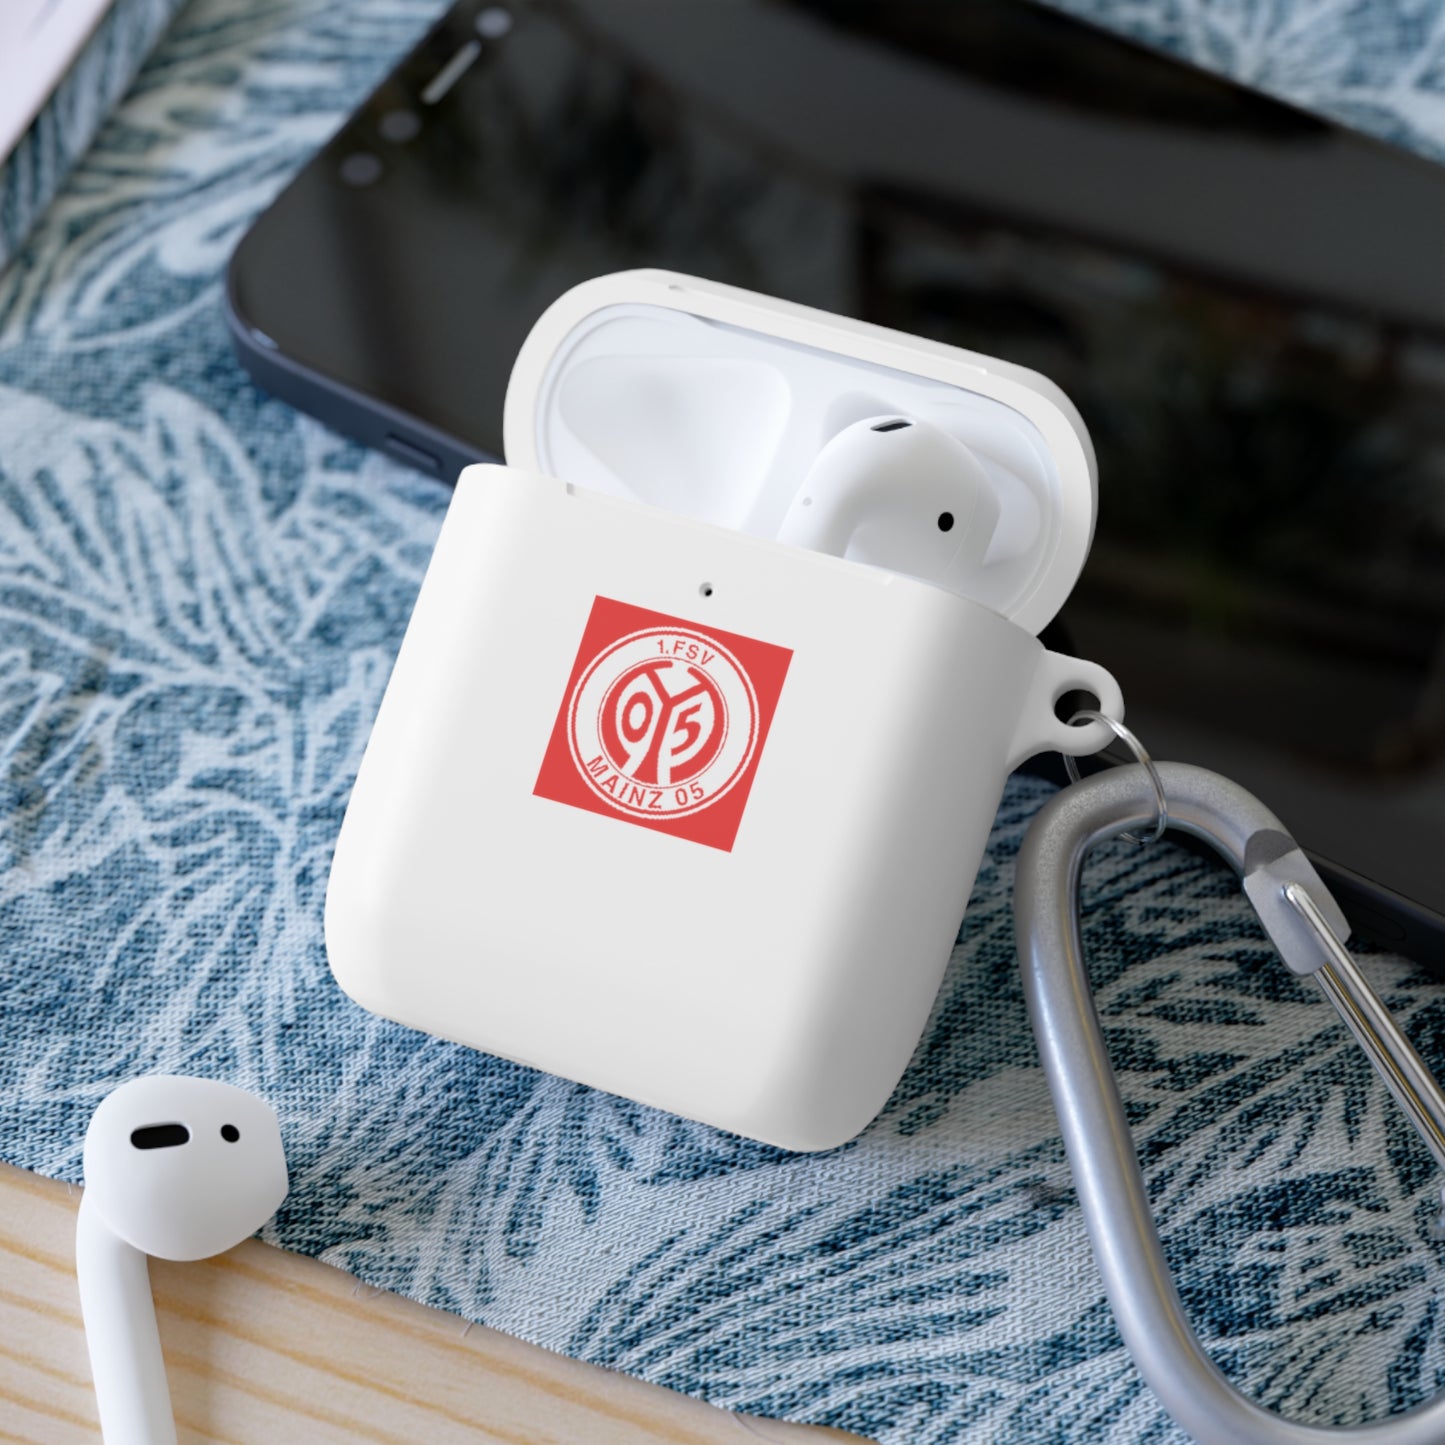 FSV Mainz 05 AirPods and AirPods Pro Case Cover